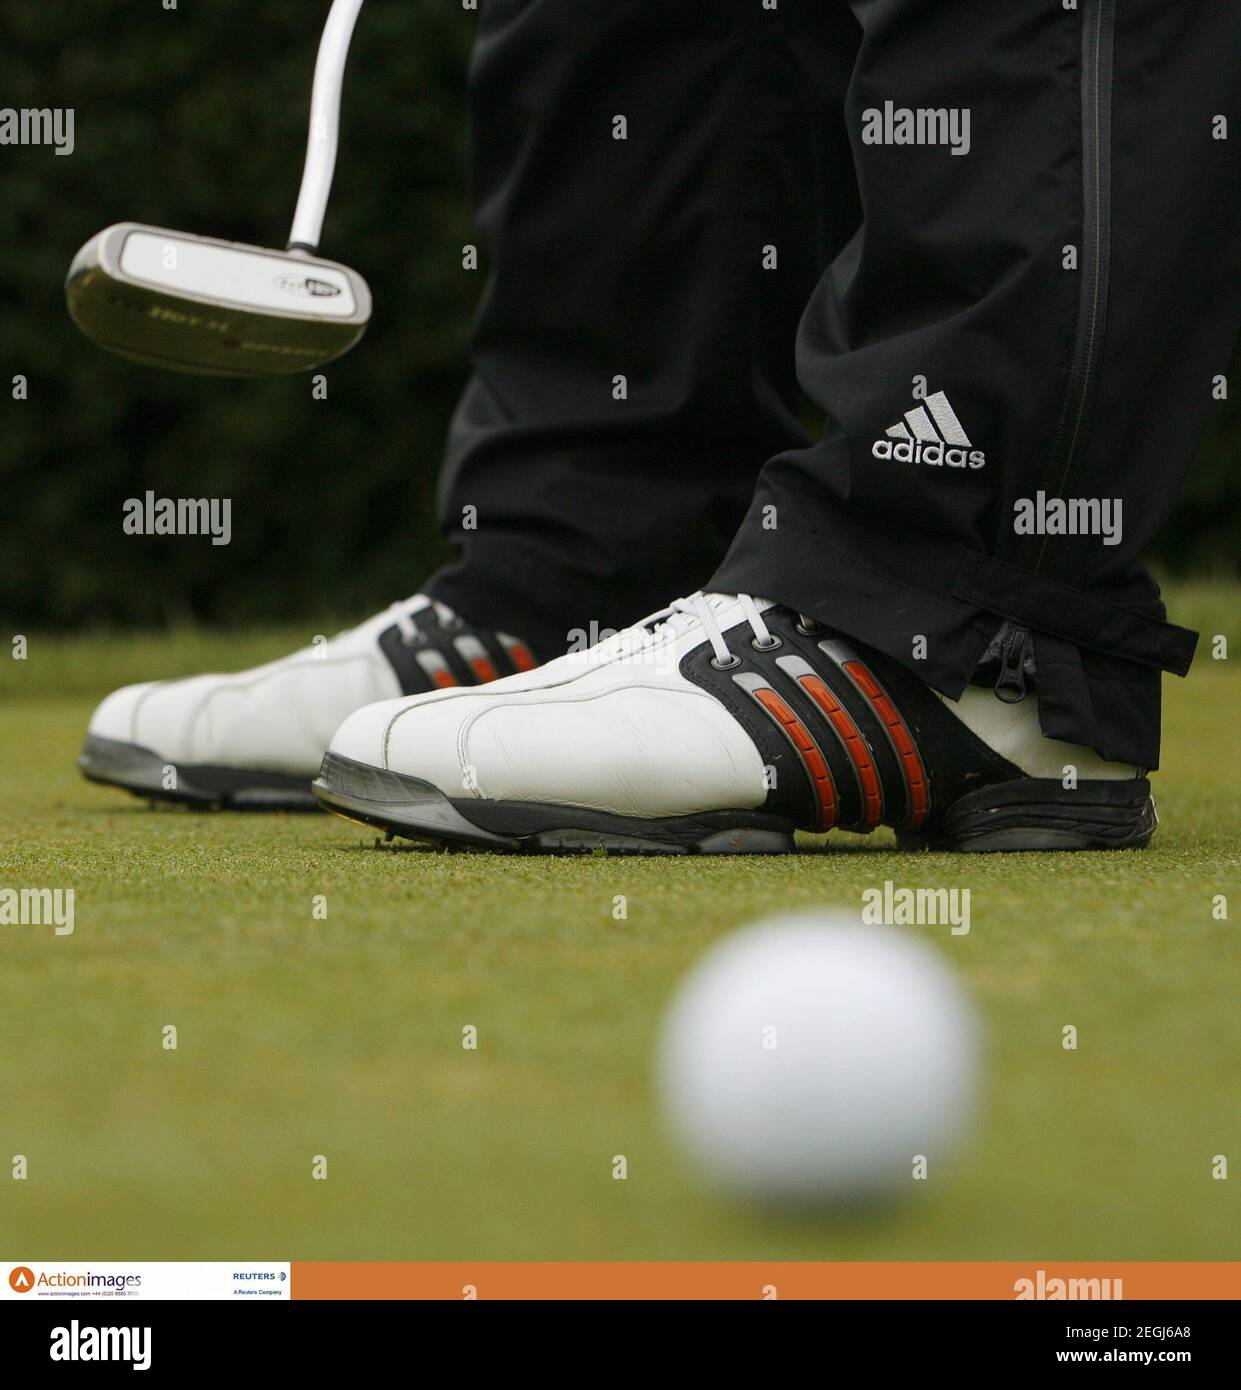 Taylor Made Golf High Resolution Stock Photography and Images - Alamy